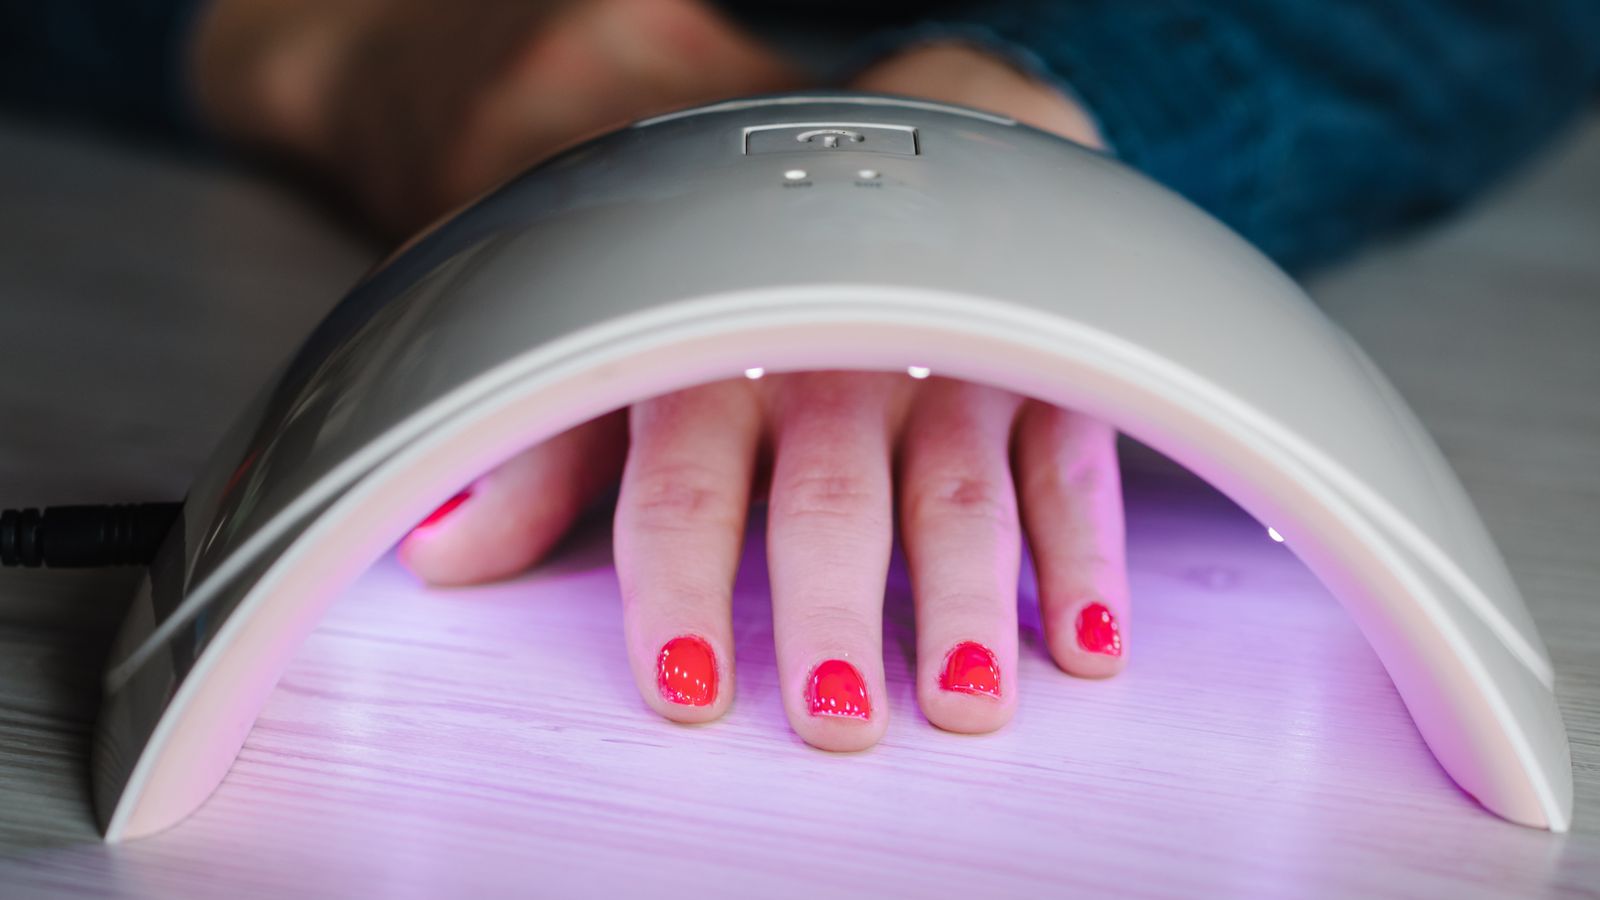 Getting a manicure? Wear gloves or sunscreen, GP warns, after study reveals UV lamp risks